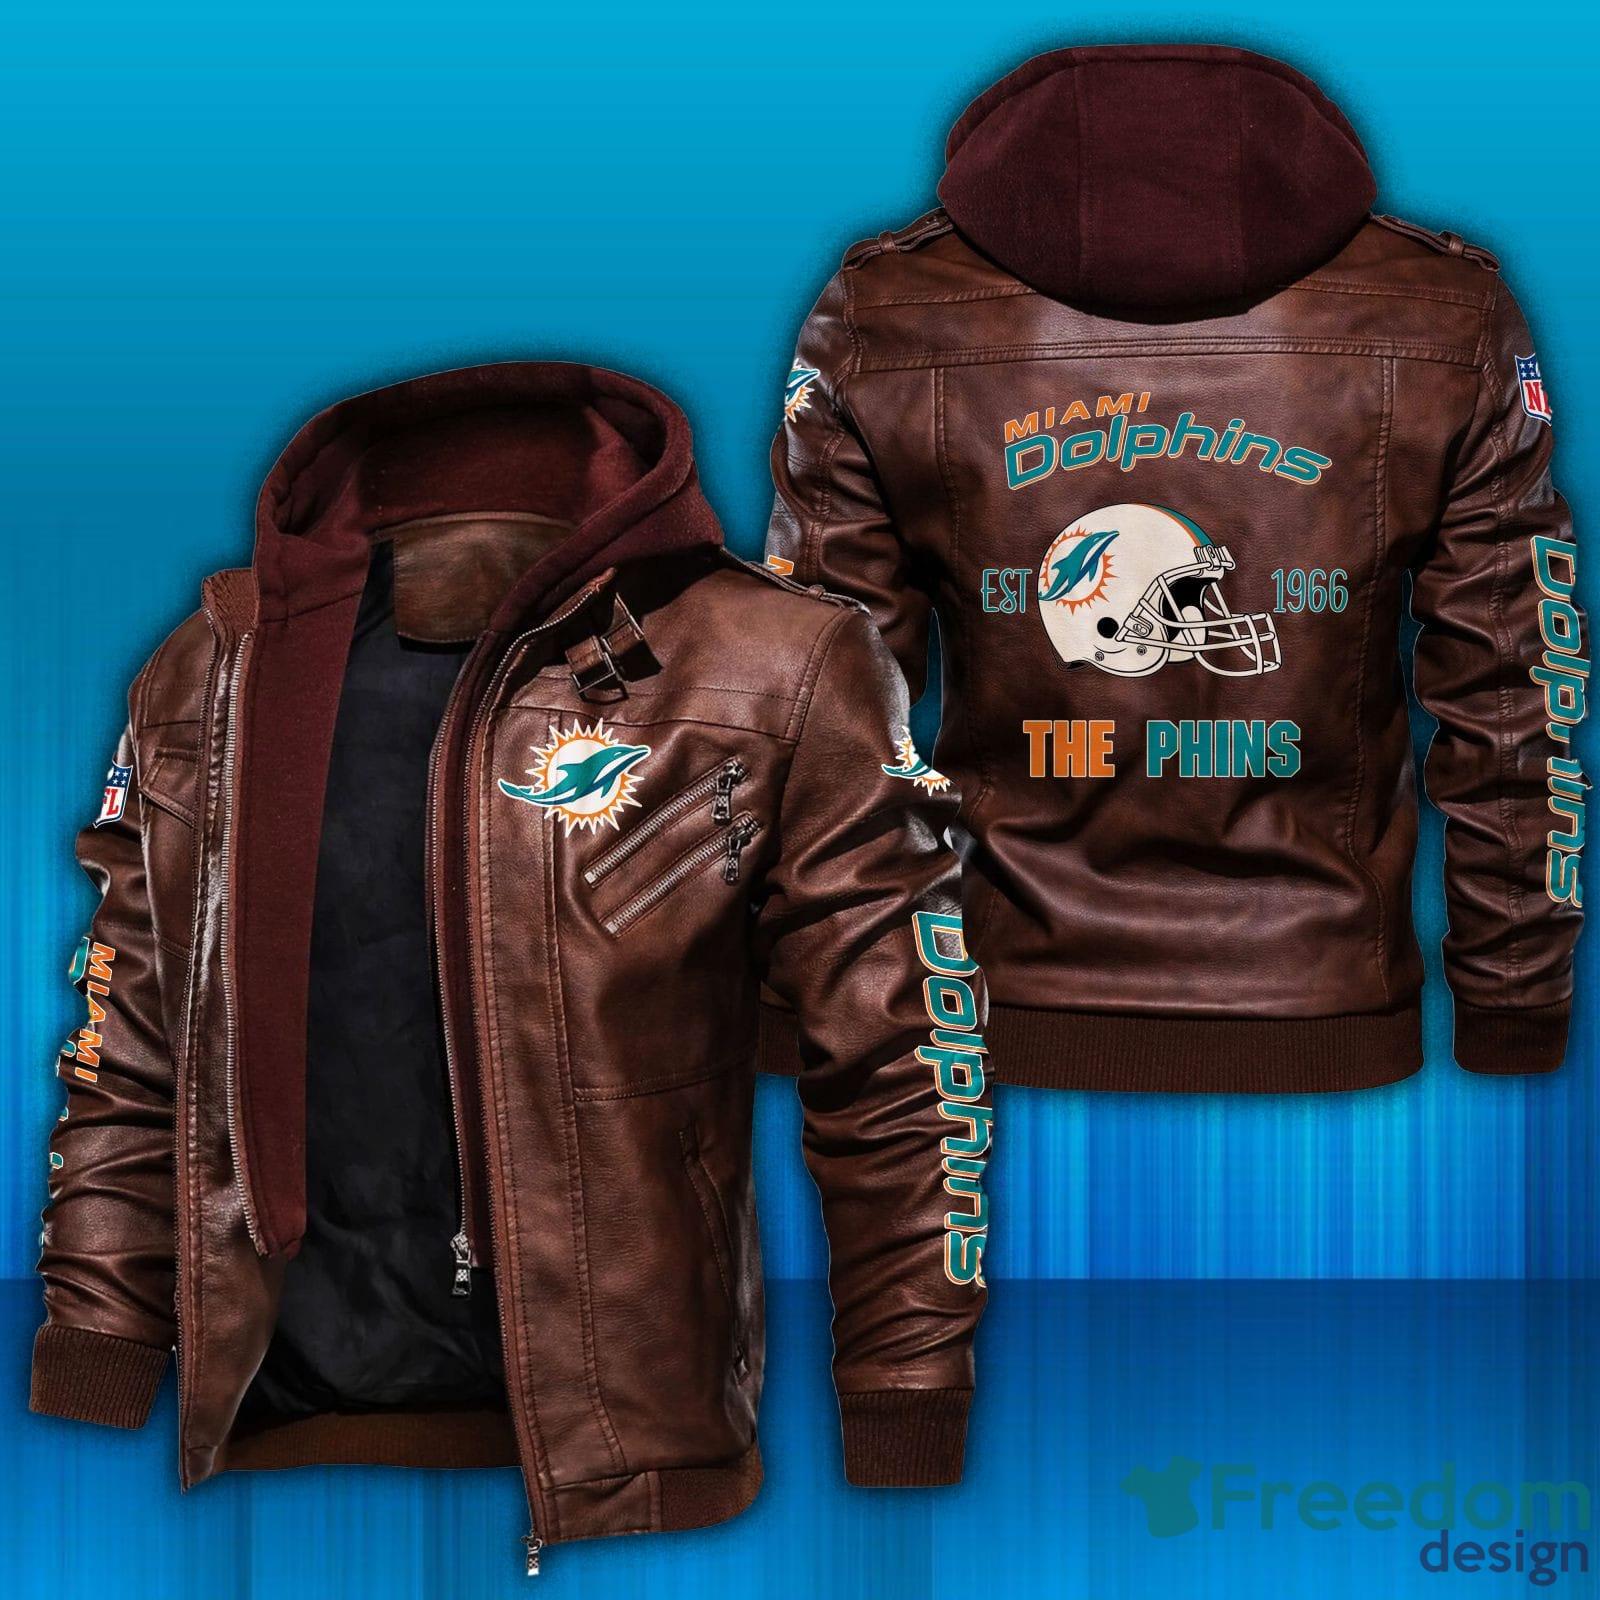 Miami Dolphins Shop - Miami Dolphins NFL The Dolphins Est 1966 Leather Jacket Brown